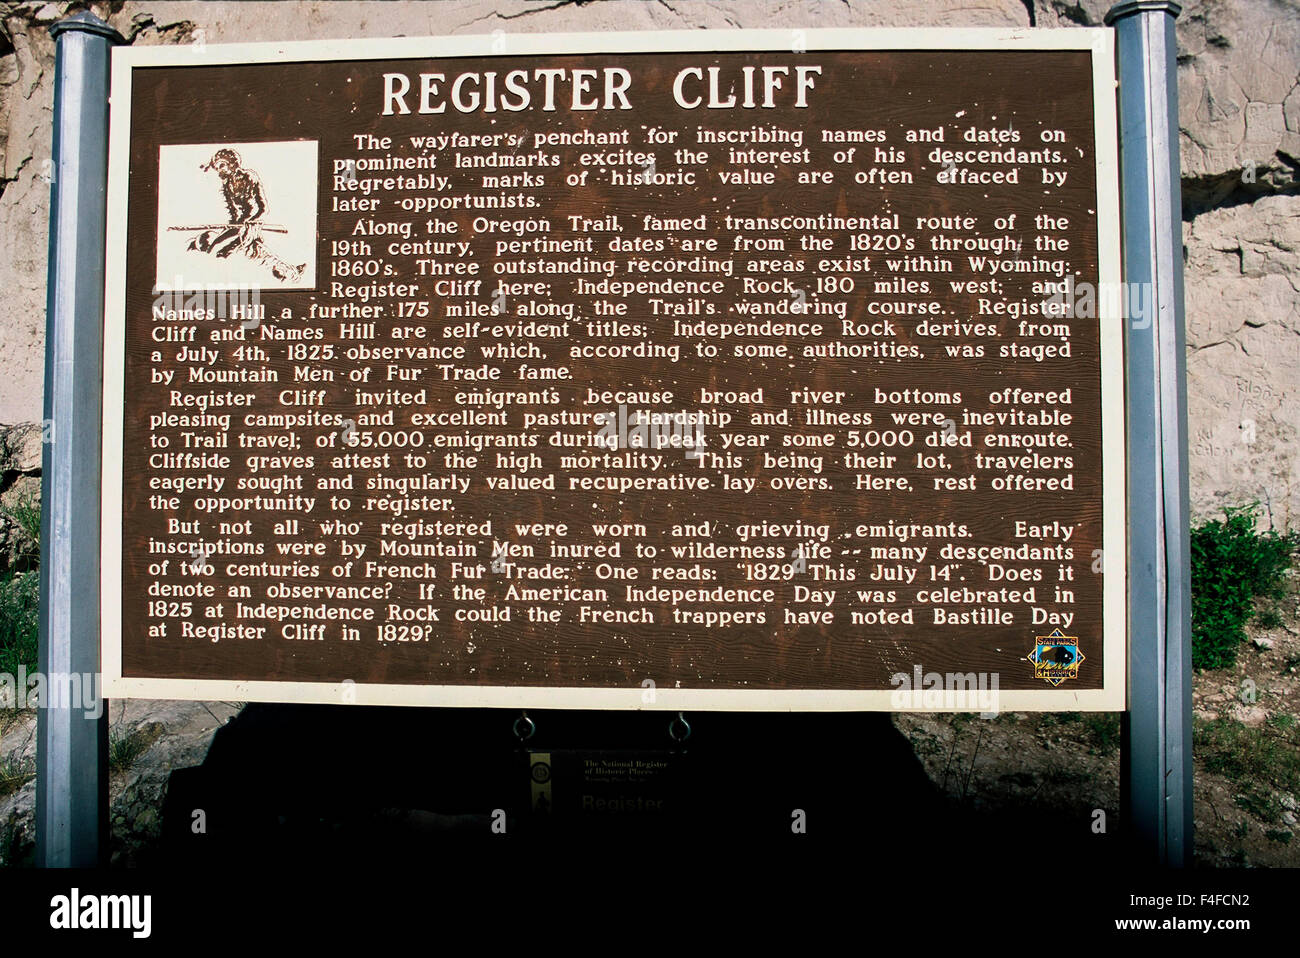 USA, Wyoming, Register Cliff, a Navigational Landmark on the Oregon Trail in Platte River Valley, Informational Sign. Stock Photo